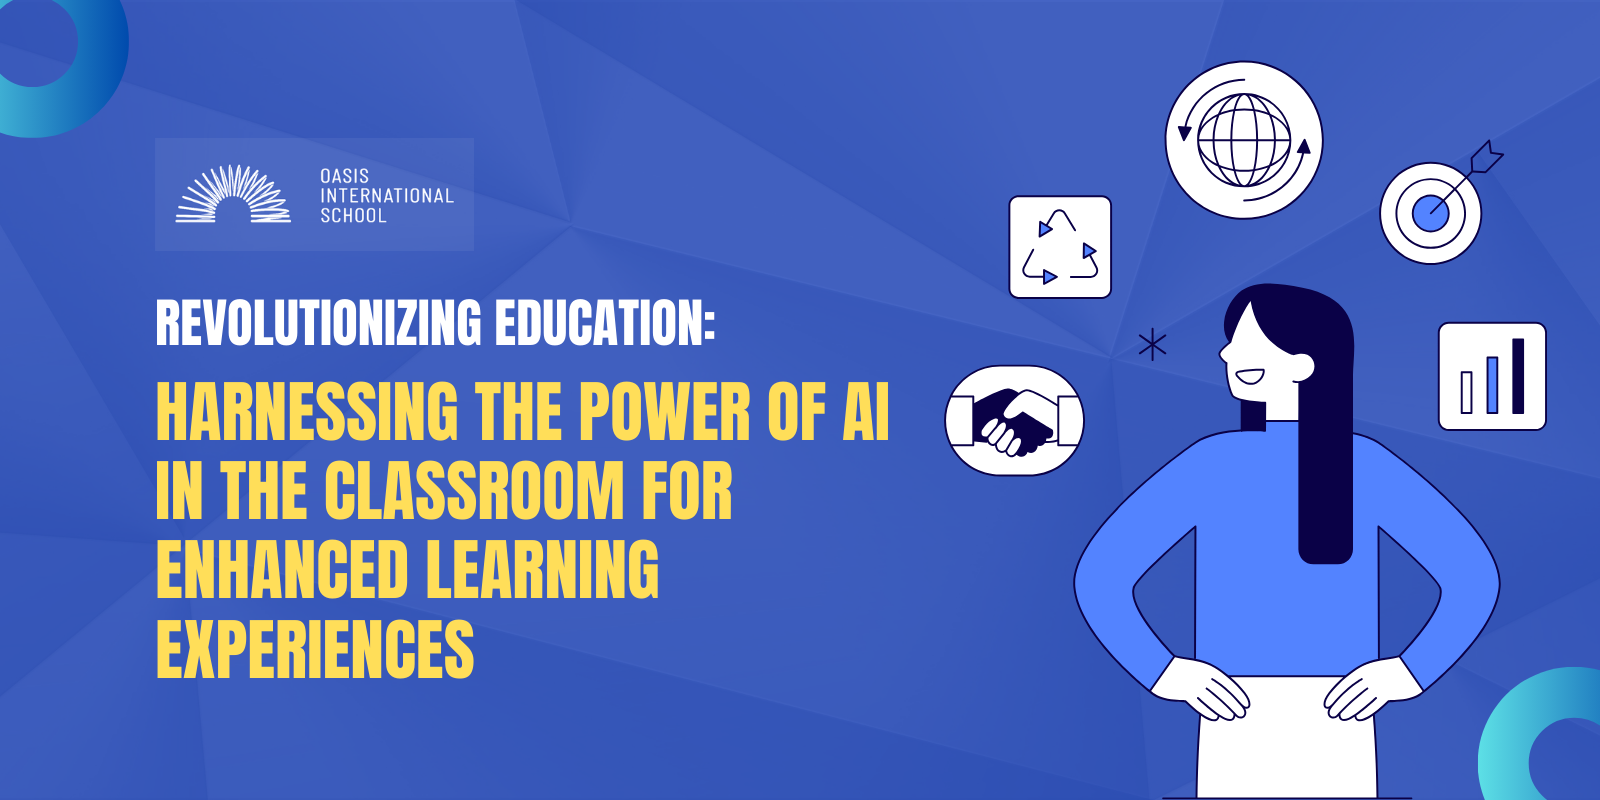 Revolutionizing Education: Harnessing the Power of AI in the Classroom for Enhanced Learning Experiences